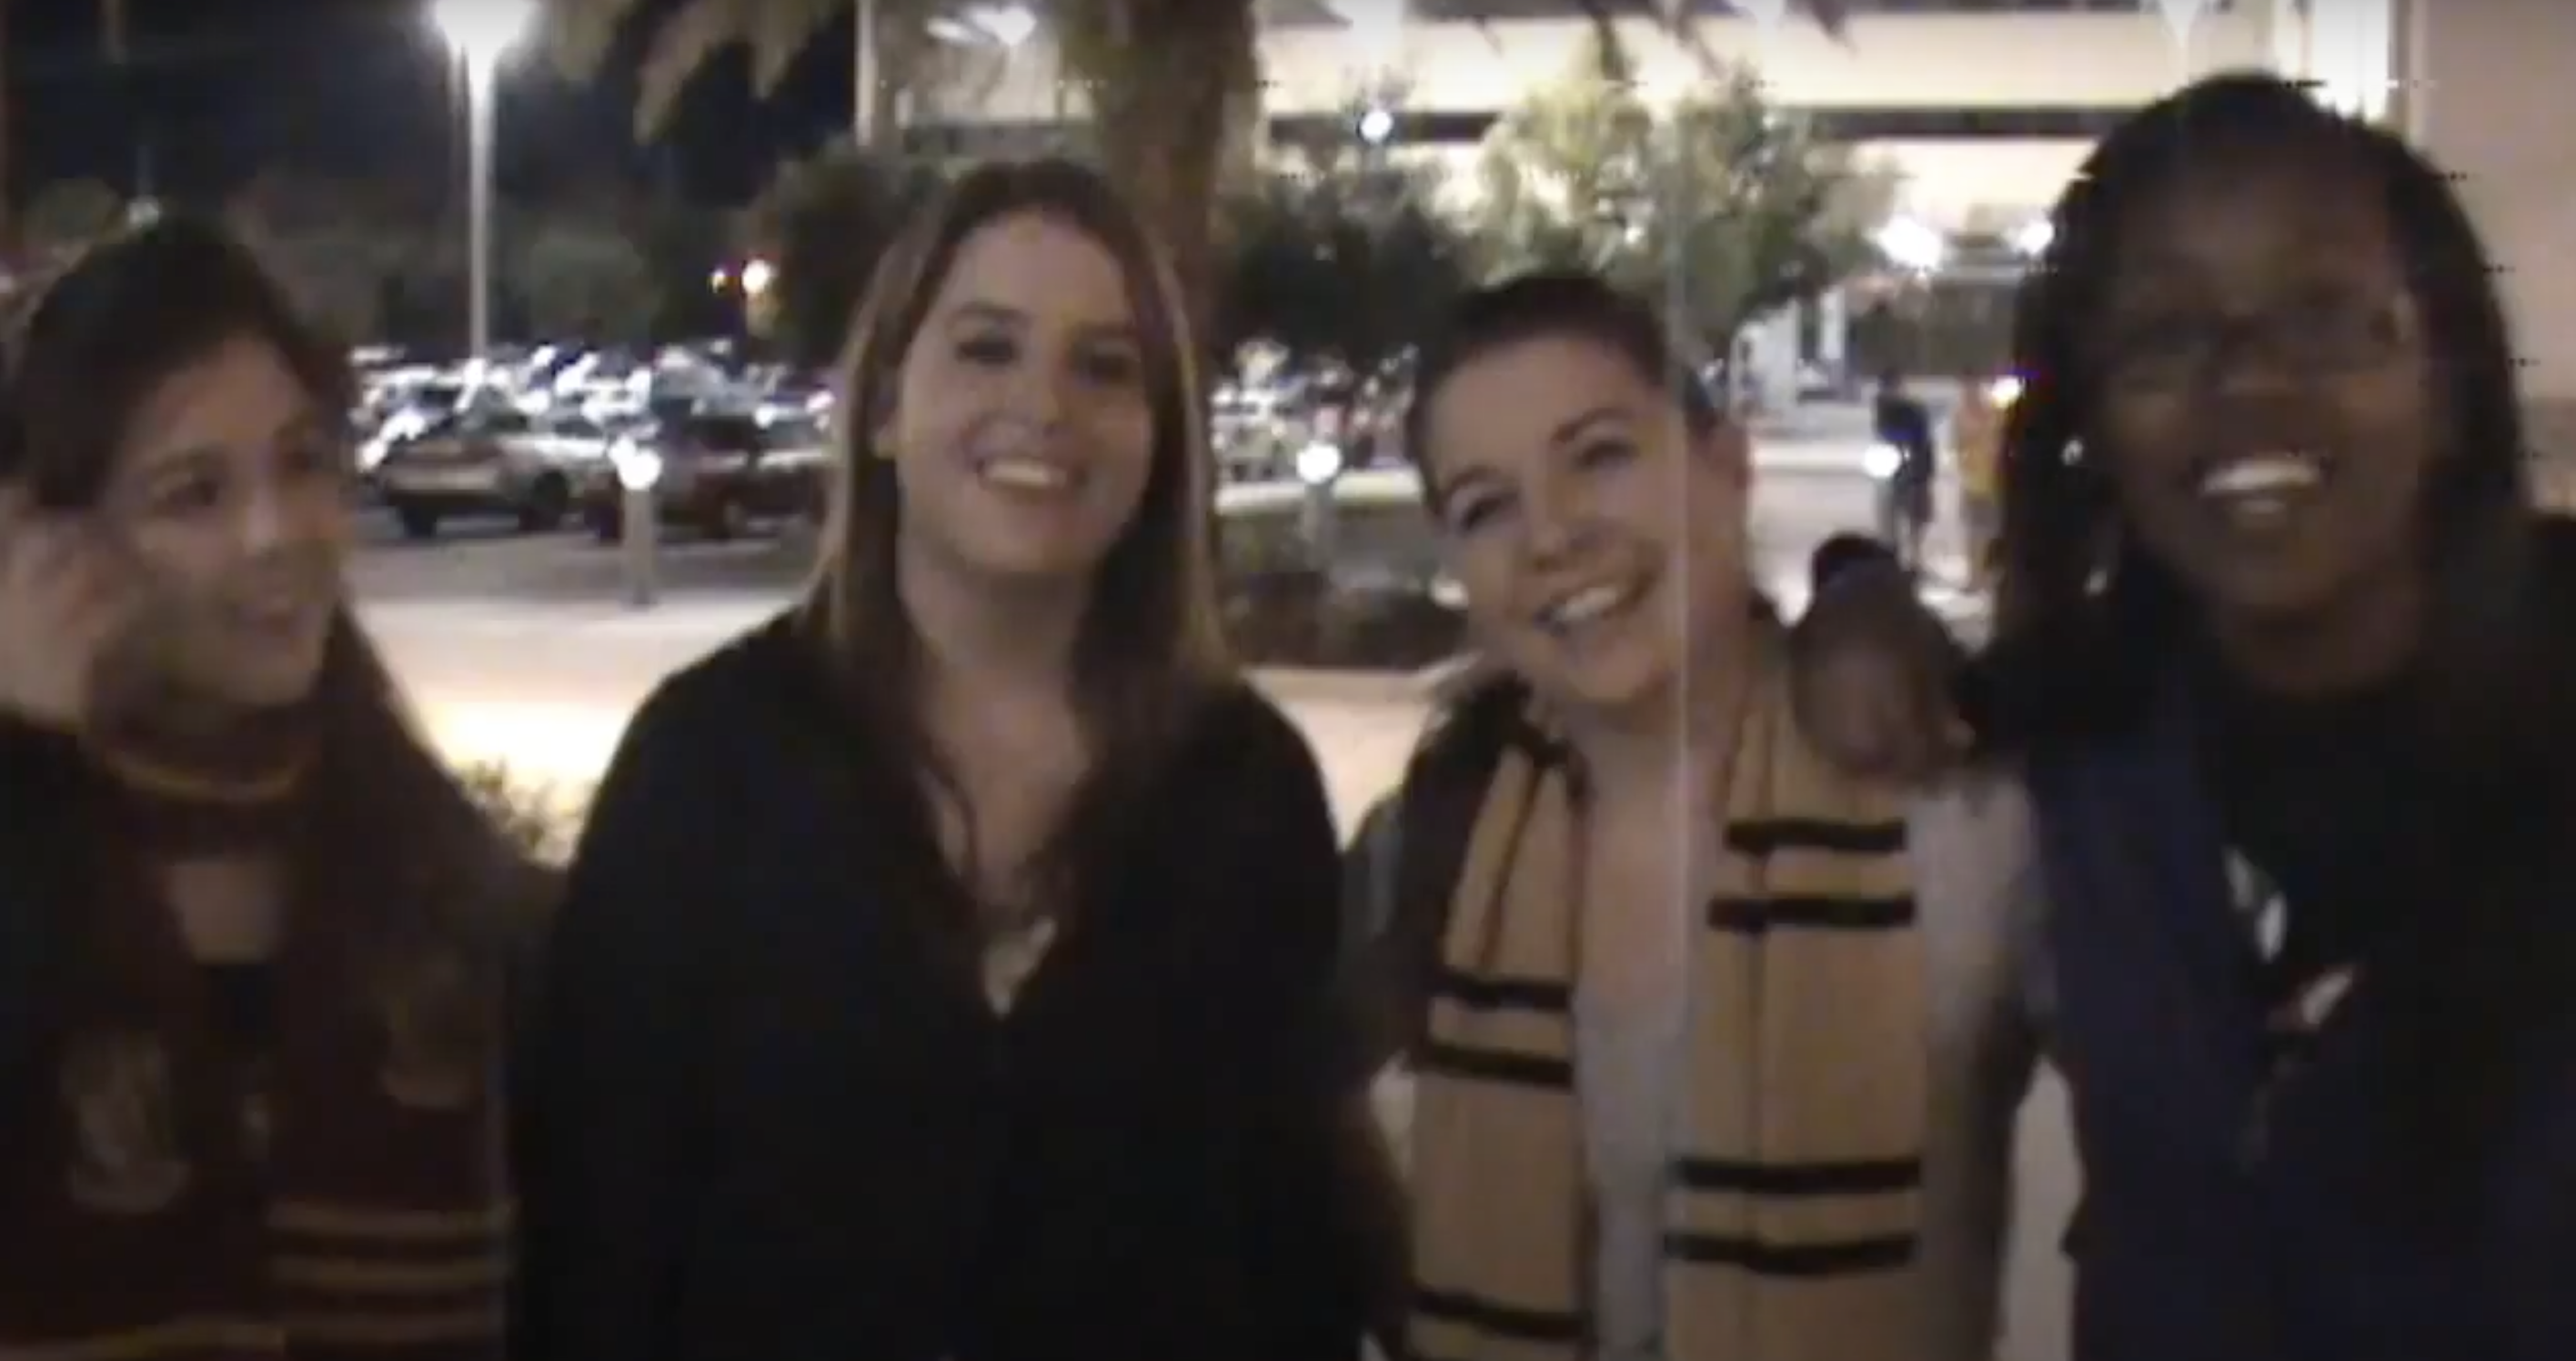 Four friends wearing &quot;Harry Potter&quot; scarves smile while waiting to get into the movie theater